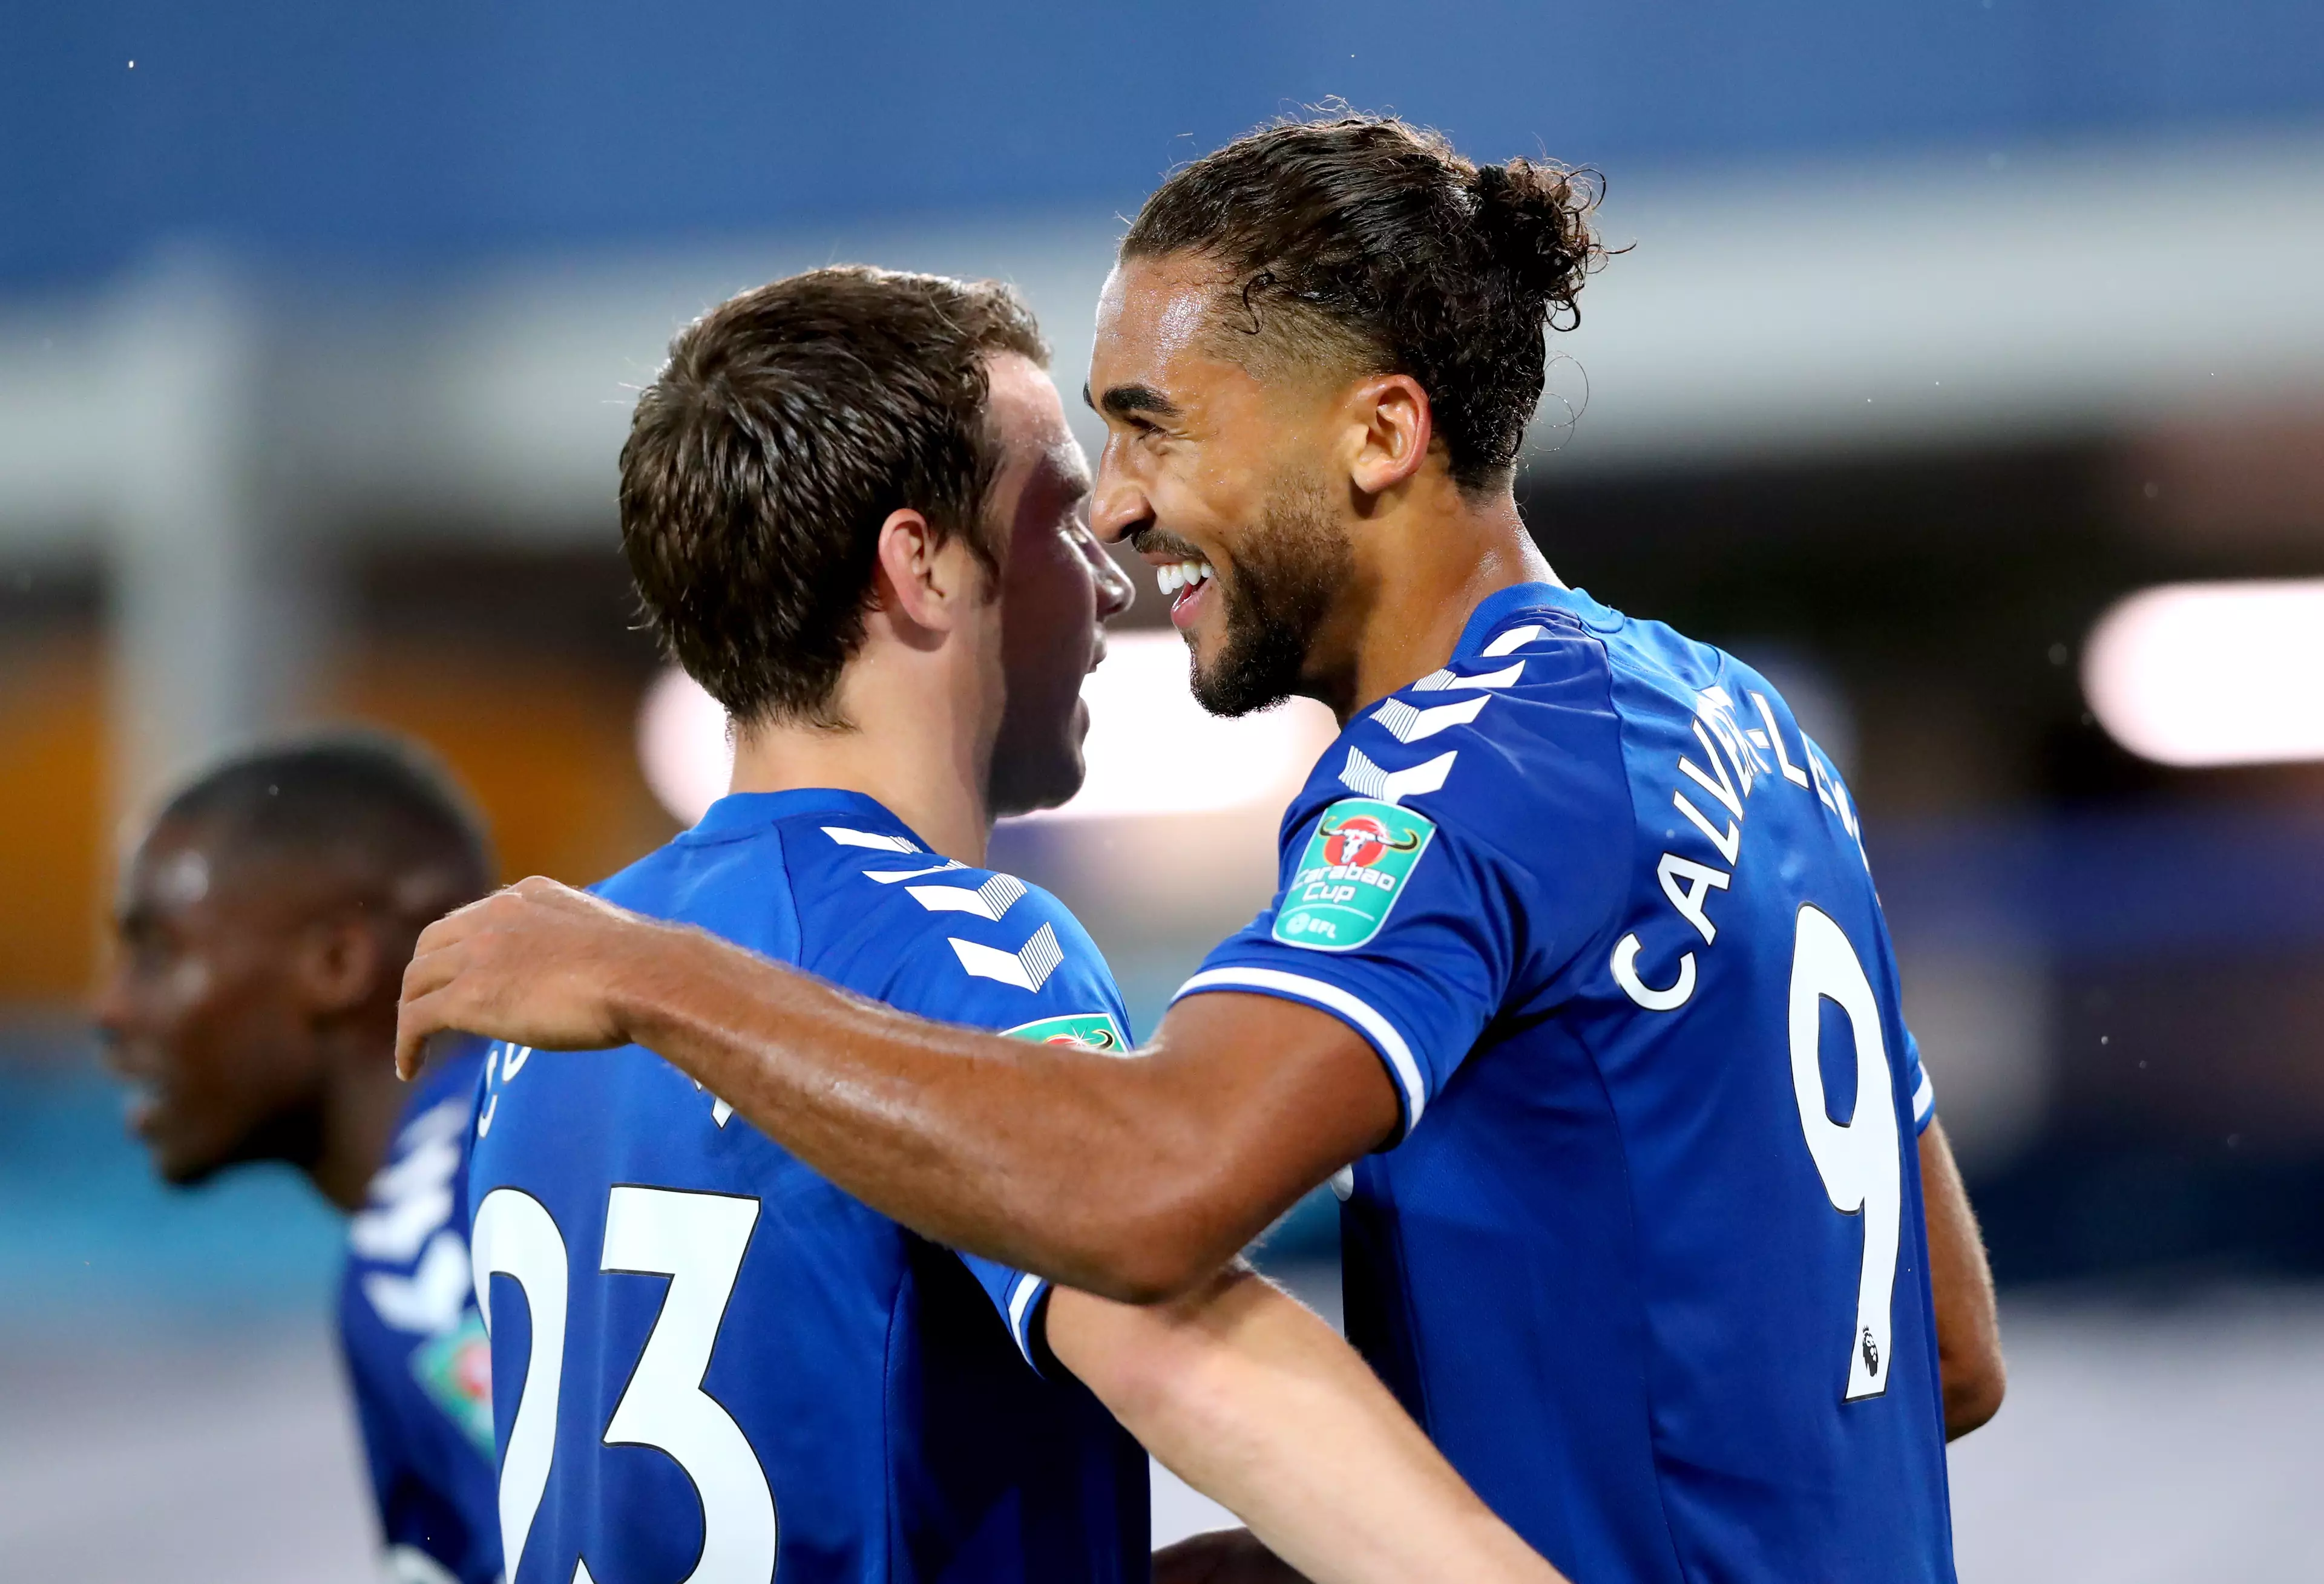 Will cinema goers see another Dominic Calvert-Lewin hat-trick? Image: PA Images